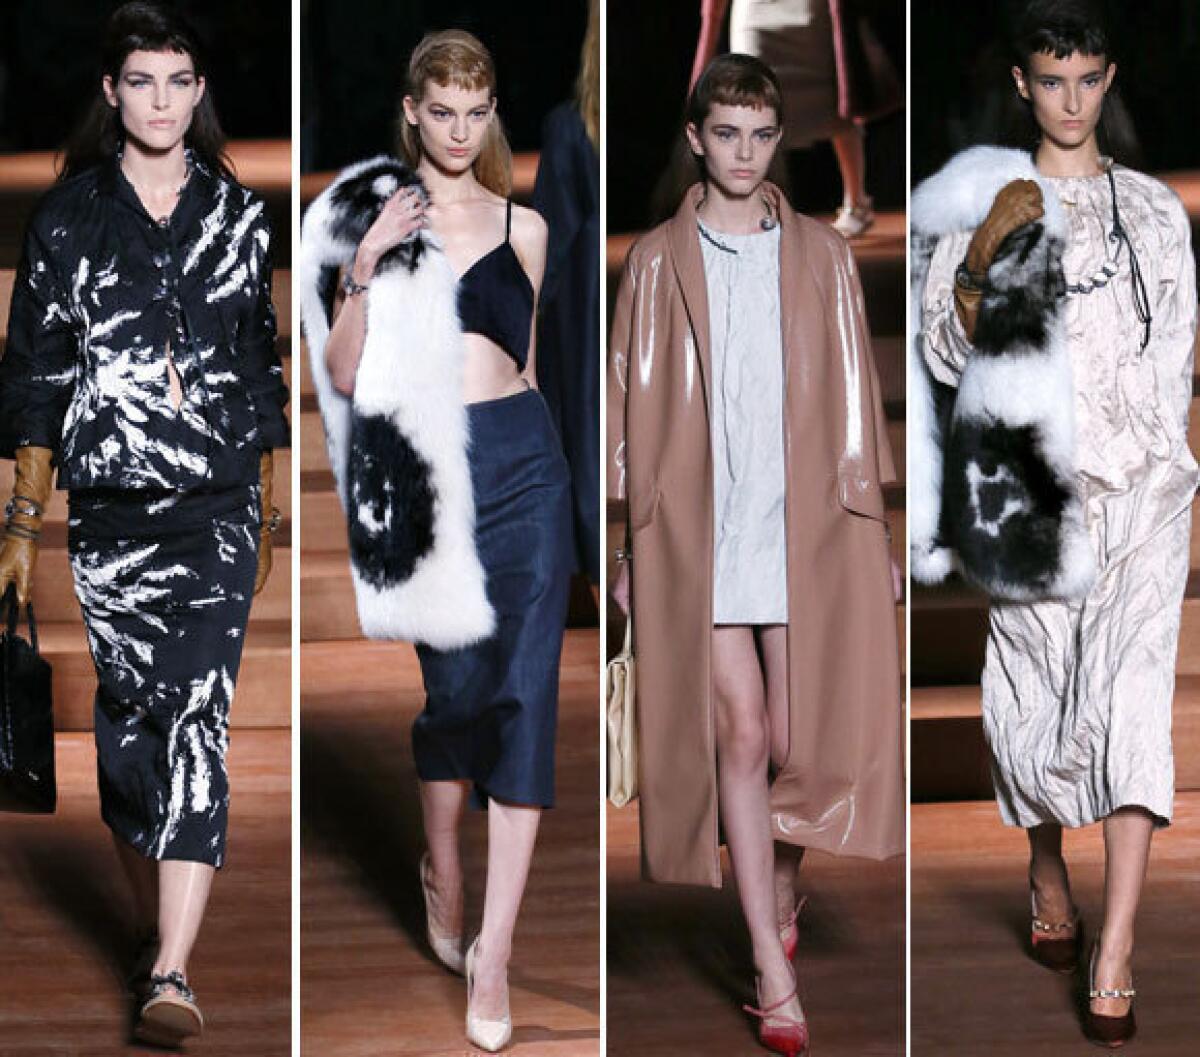 Looks from the Miu Miu spring-summer 2013 collection shown during Paris Fashion Week.